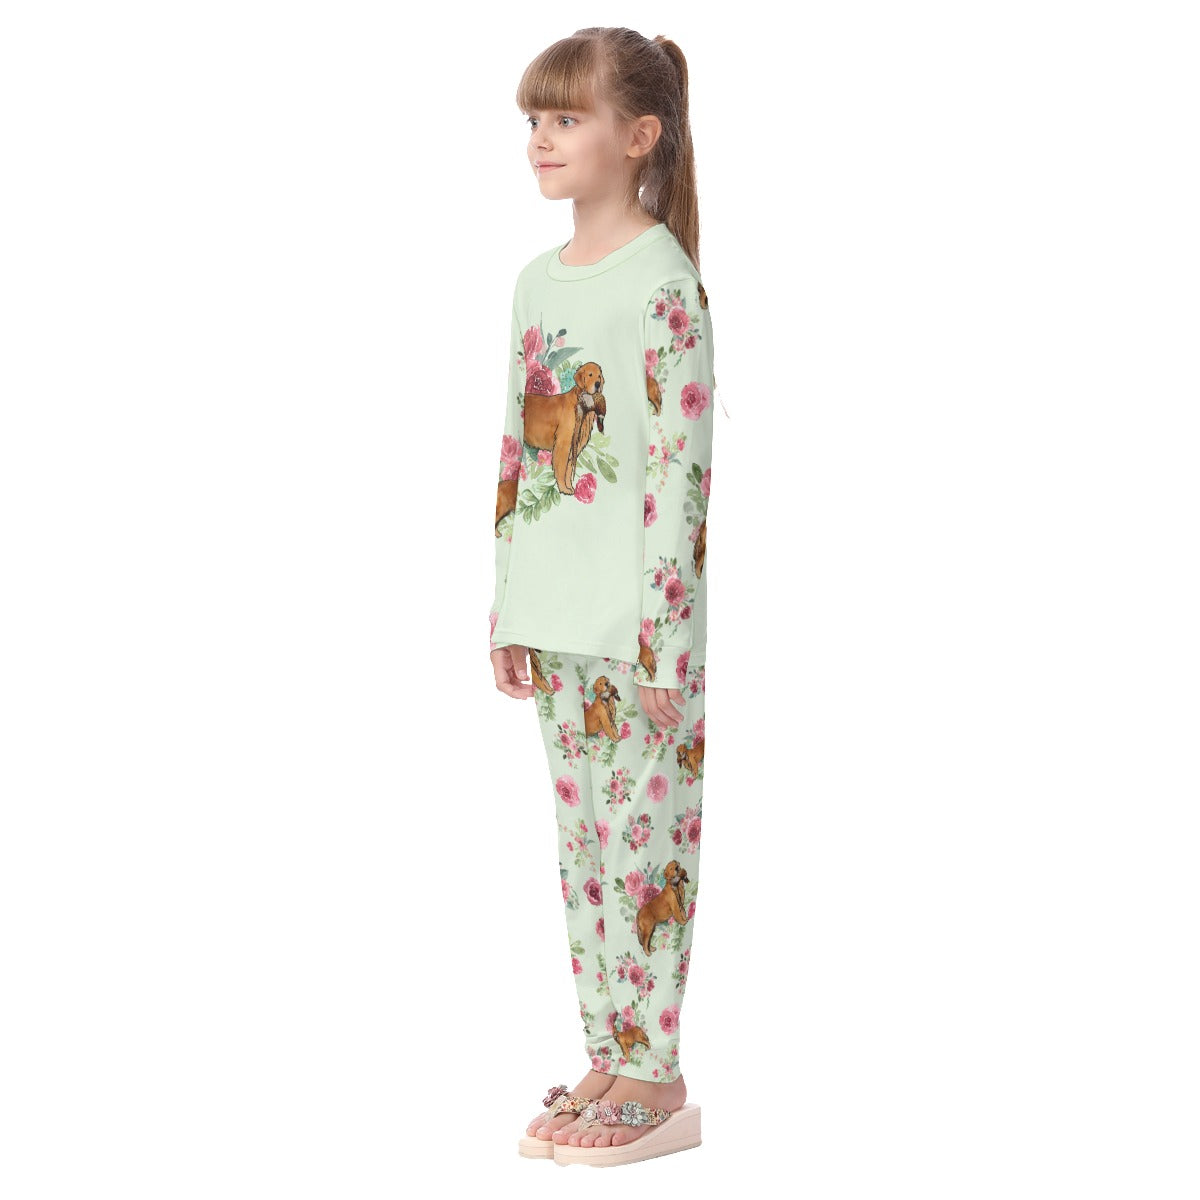 All-Over Print Kid's Base Layers